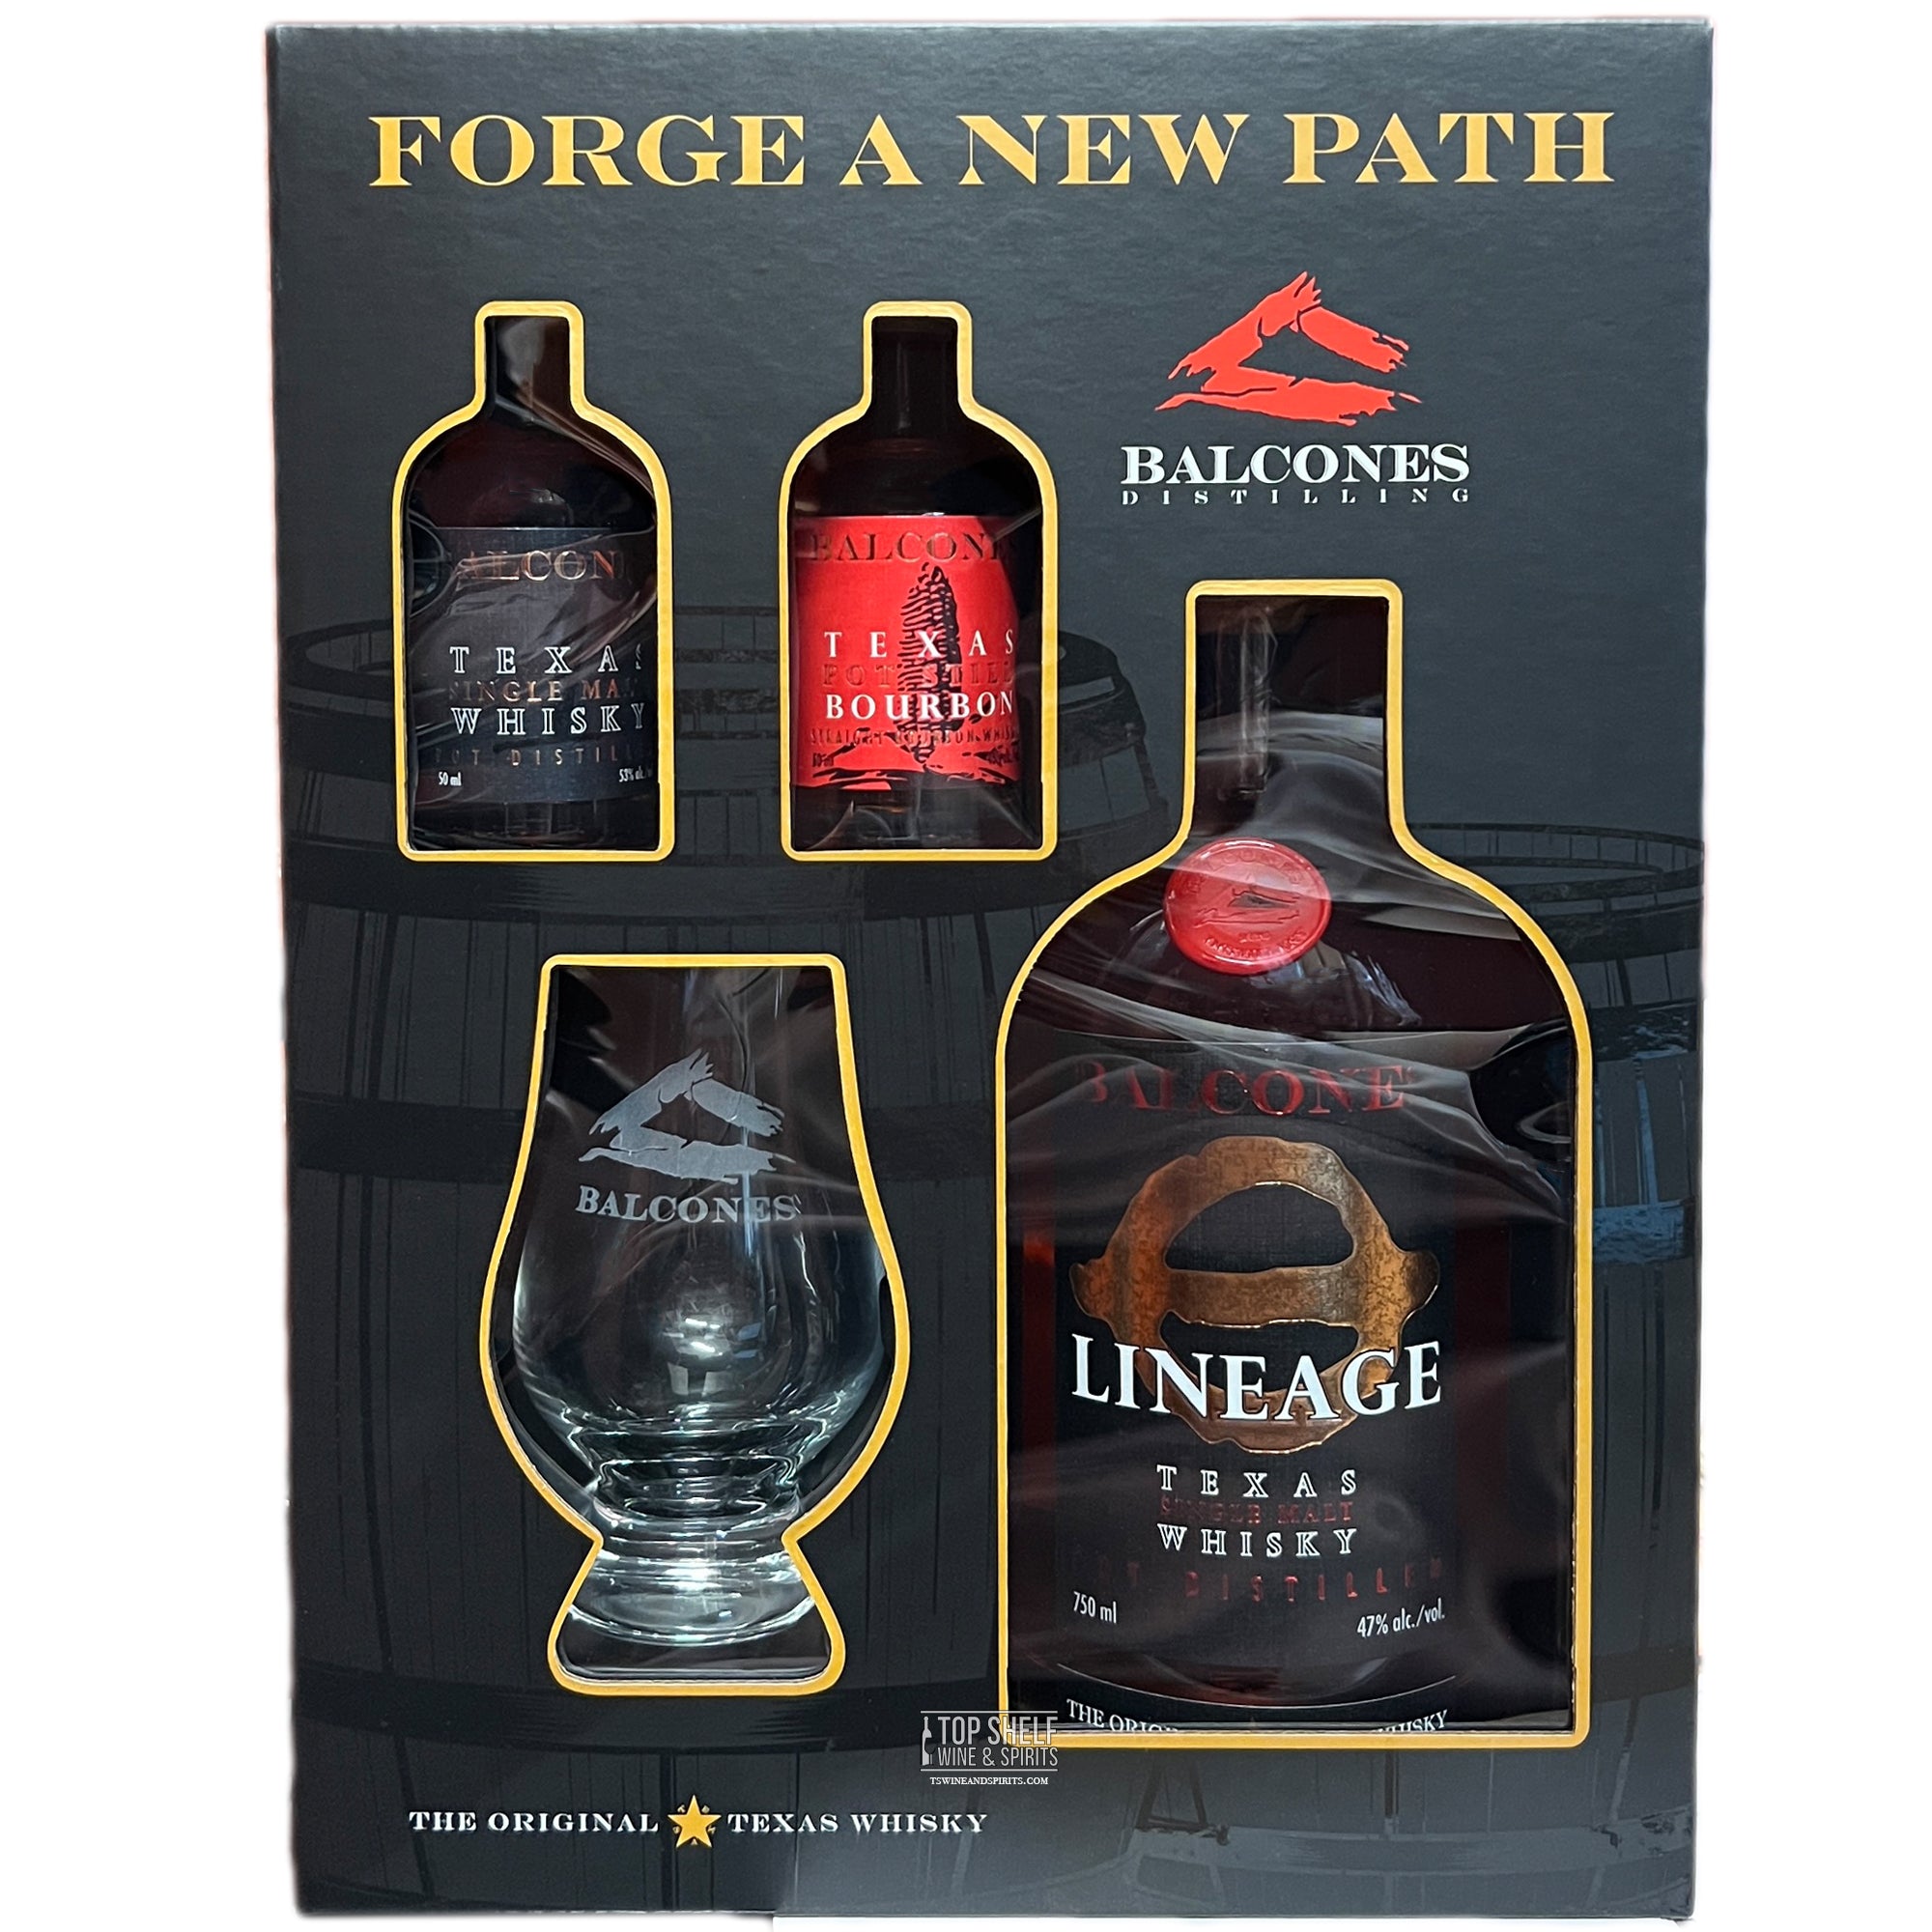 Balcones Lineage "Forge A New Path" Gift Set